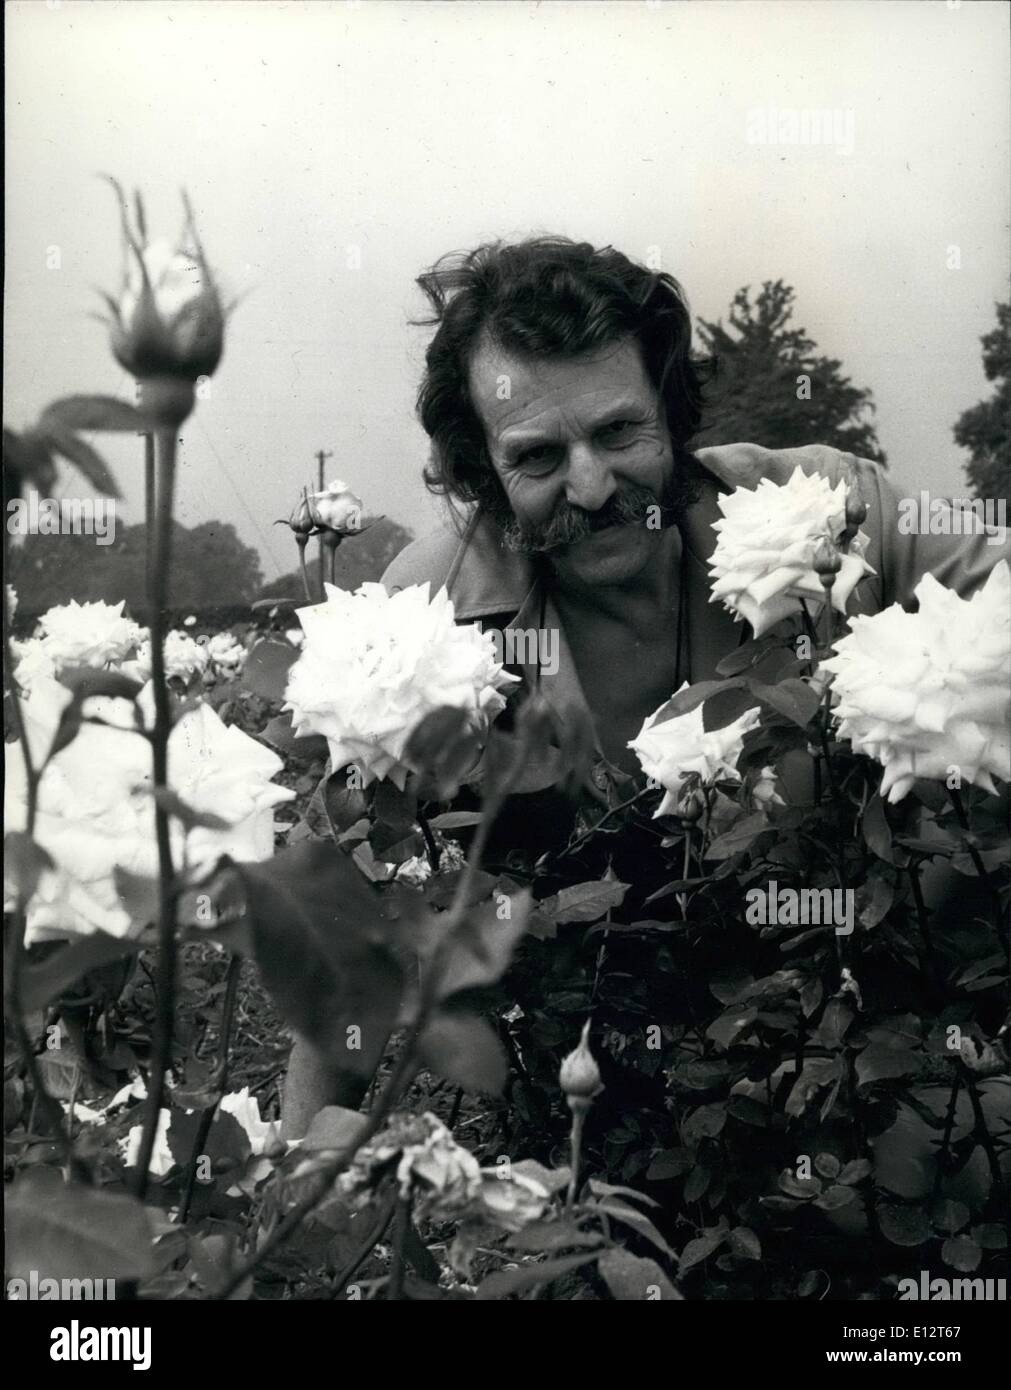 Feb. 25, 2012 - The Englishman and his roses Ã¢â‚¬â€œ Harry Wheatcroft with some of his famous roses which he loves so much. (Cr Stock Photo